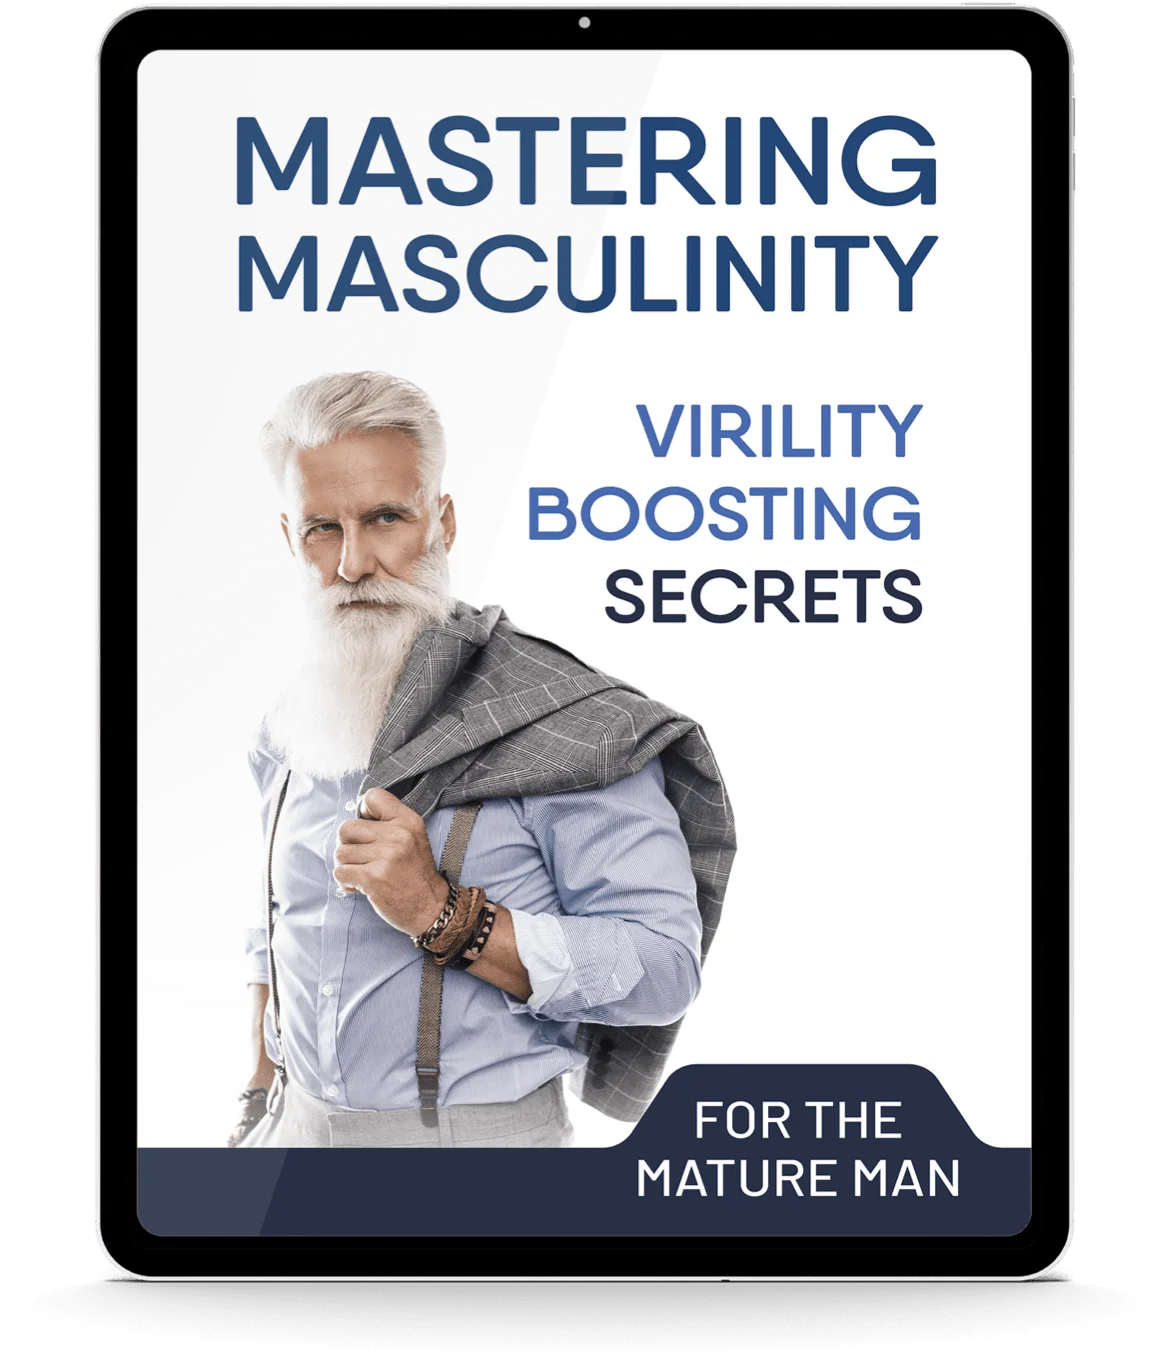 Mastering Masculinity: Virility Boosting Secrets for the Mature Man